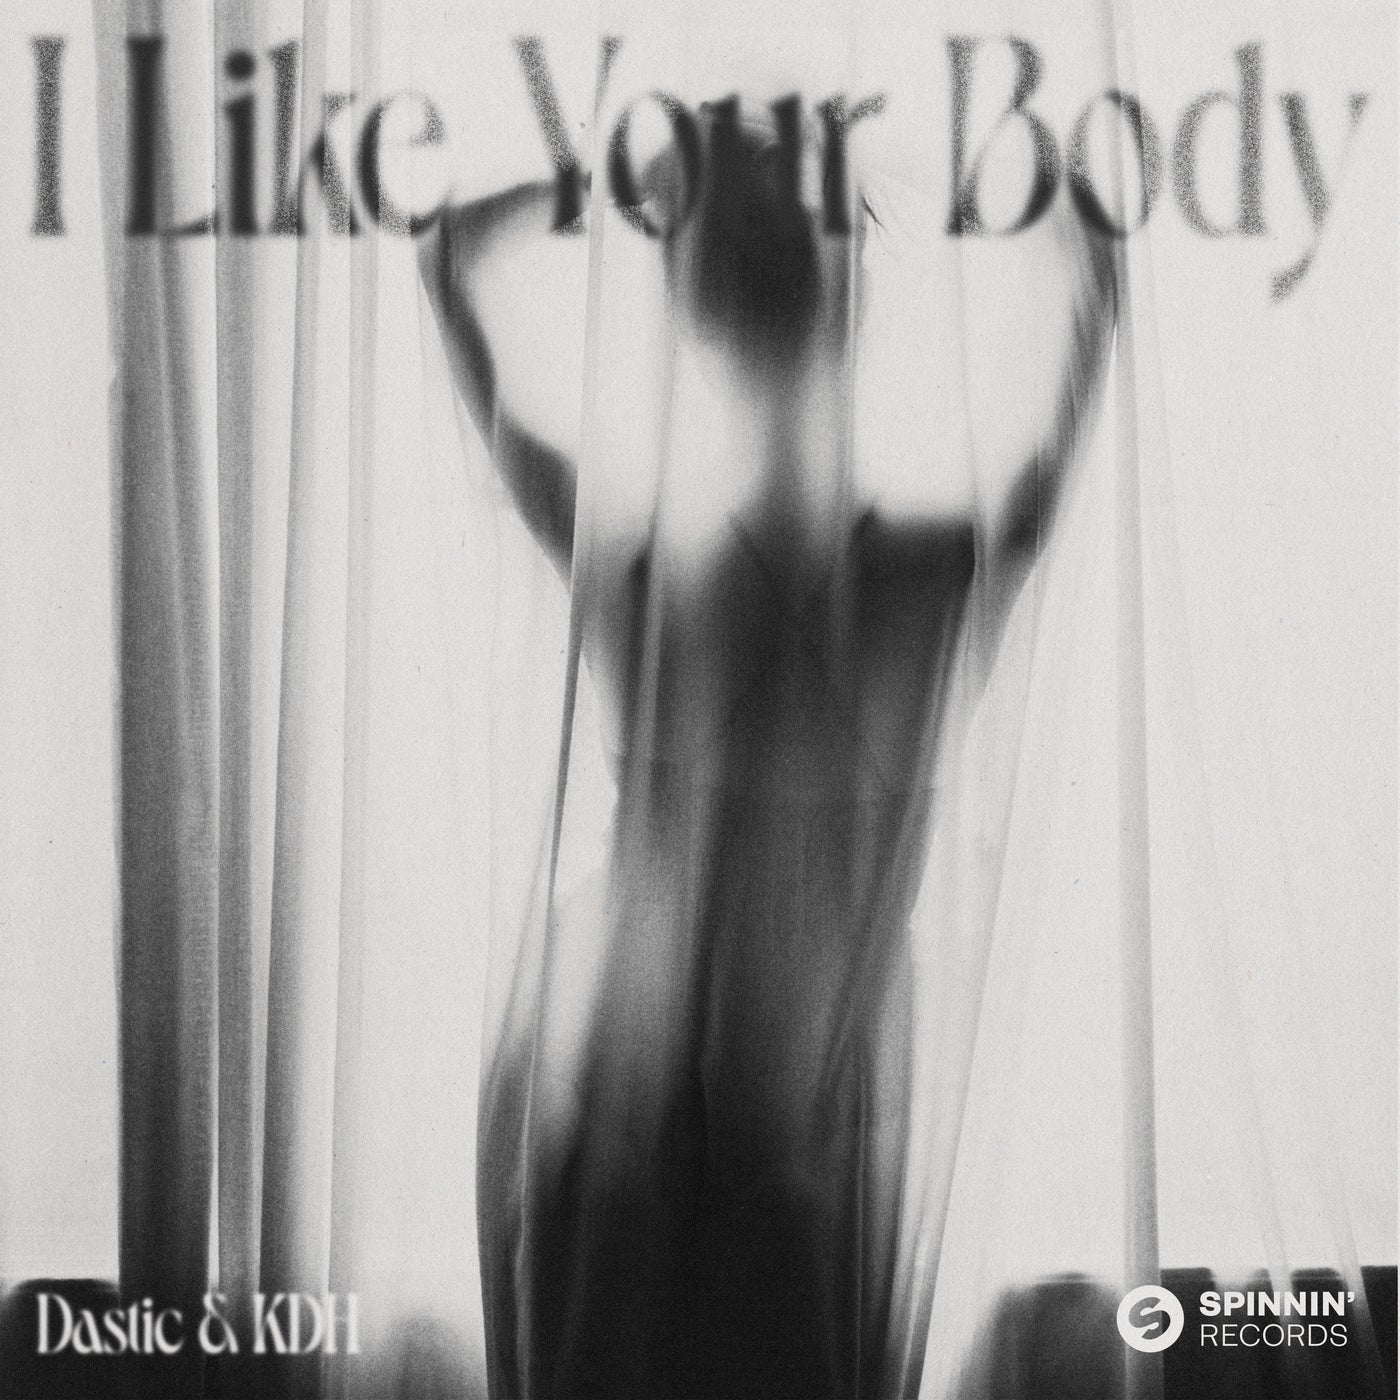 I Like Your Body (Extended Mix)